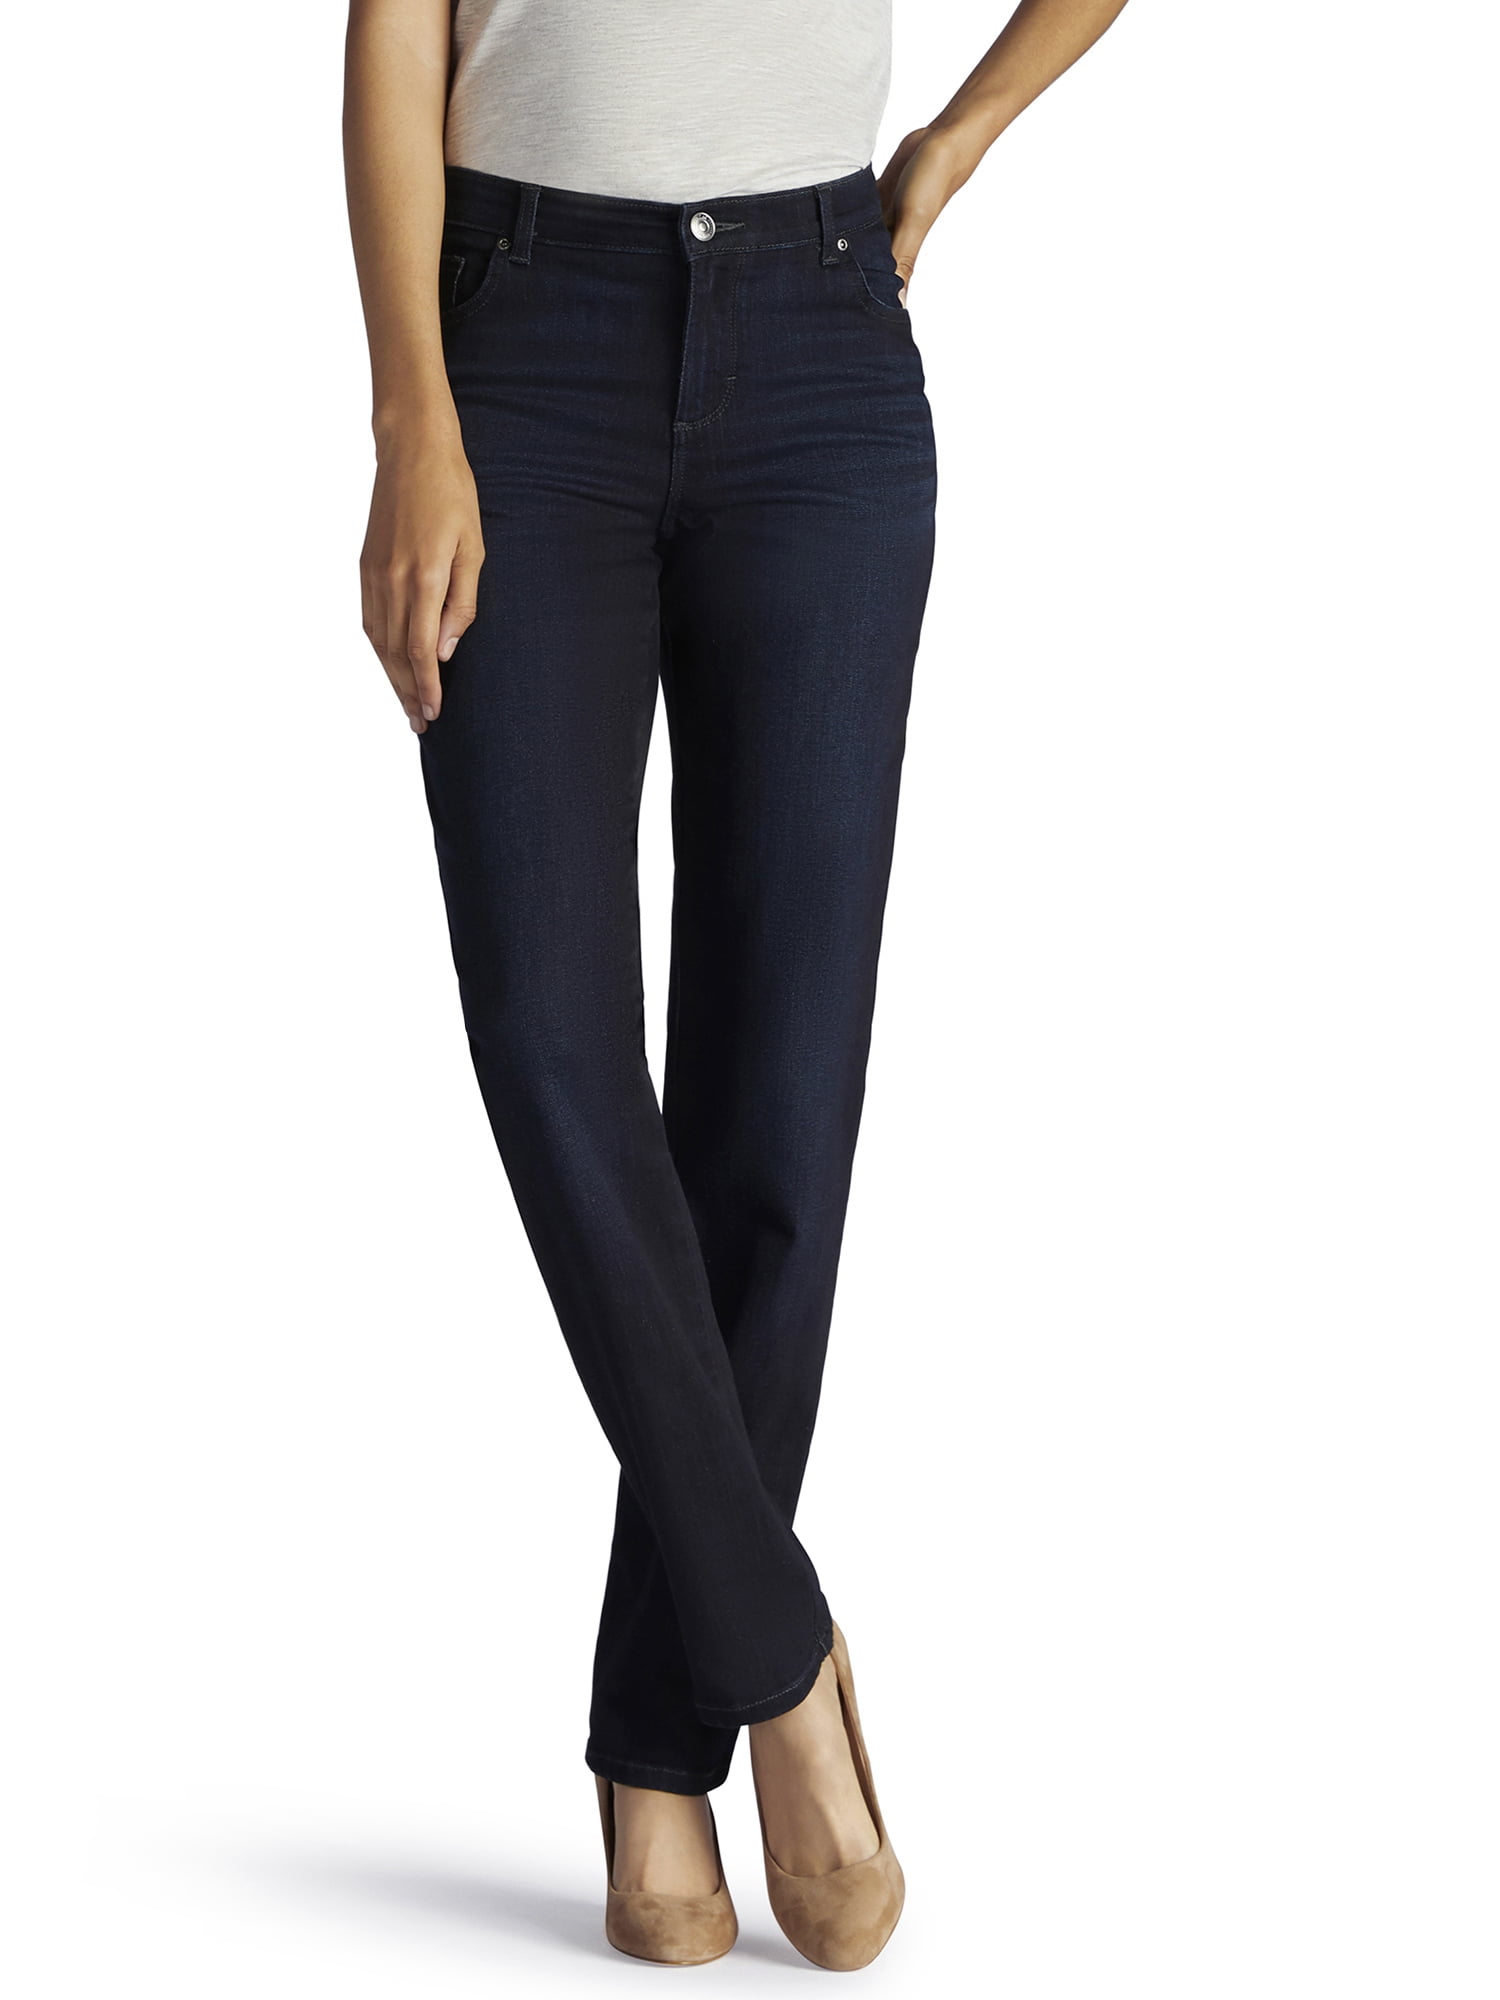 LEE Womens Relaxed Fit Straight Leg Classic Jeans Black size 8 18 NEW 